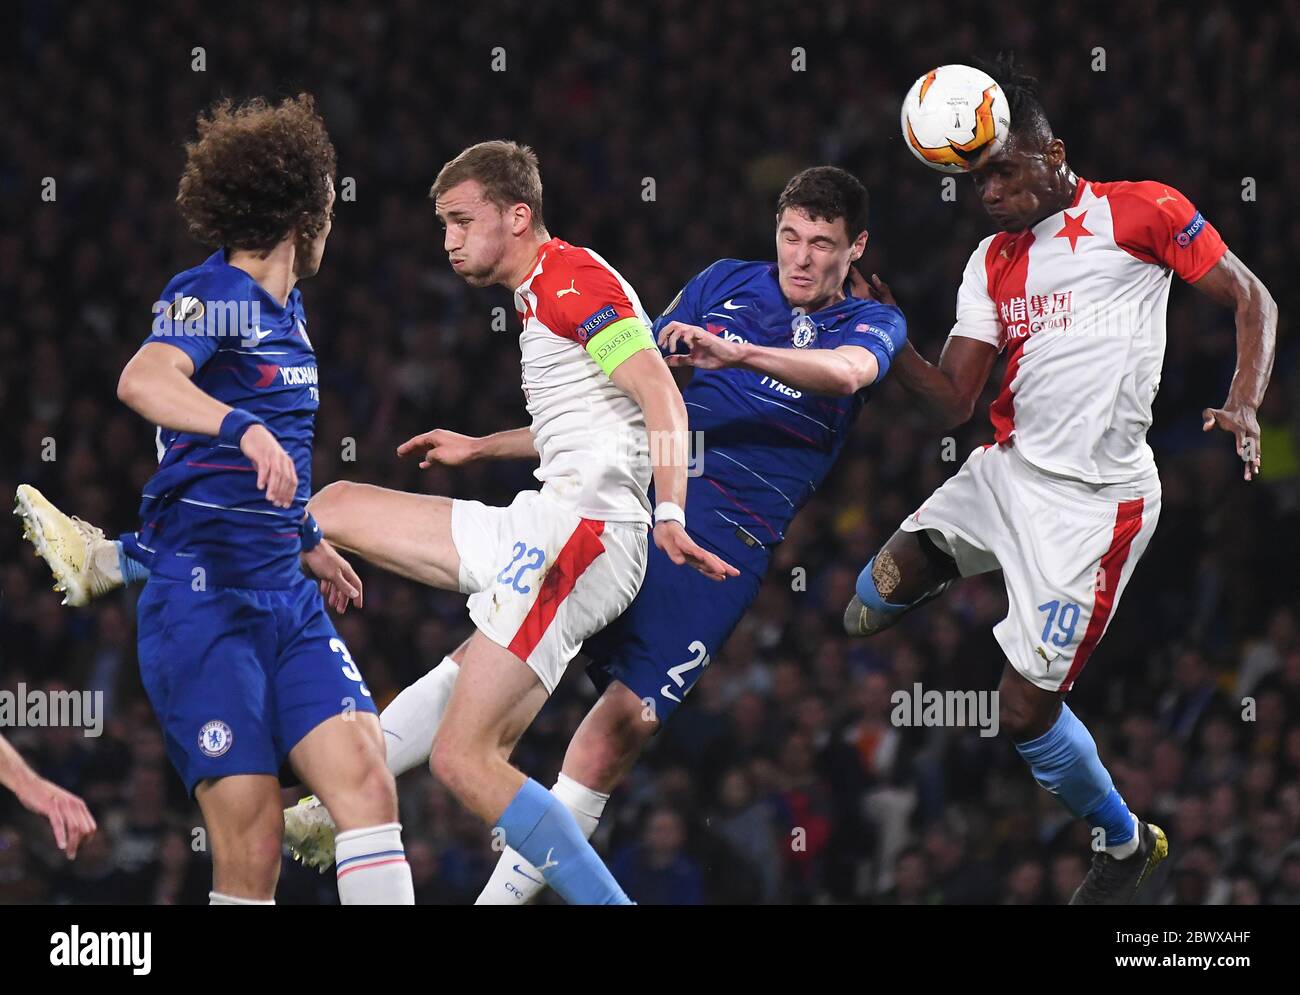 LONDON, ENGLAND - APRIL 18, 2019: Tomas Soucek of Slavia (L), Andreas Christensen of Chelsea (C) and Simon Deli of Slavia (R) pictured during the second leg of the 2018/19 UEFA Europa League Quarter-Finals game between Chelsea FC (England) and SK Slavia Praha (Czech Republic) at Stamford Bridge. Stock Photo